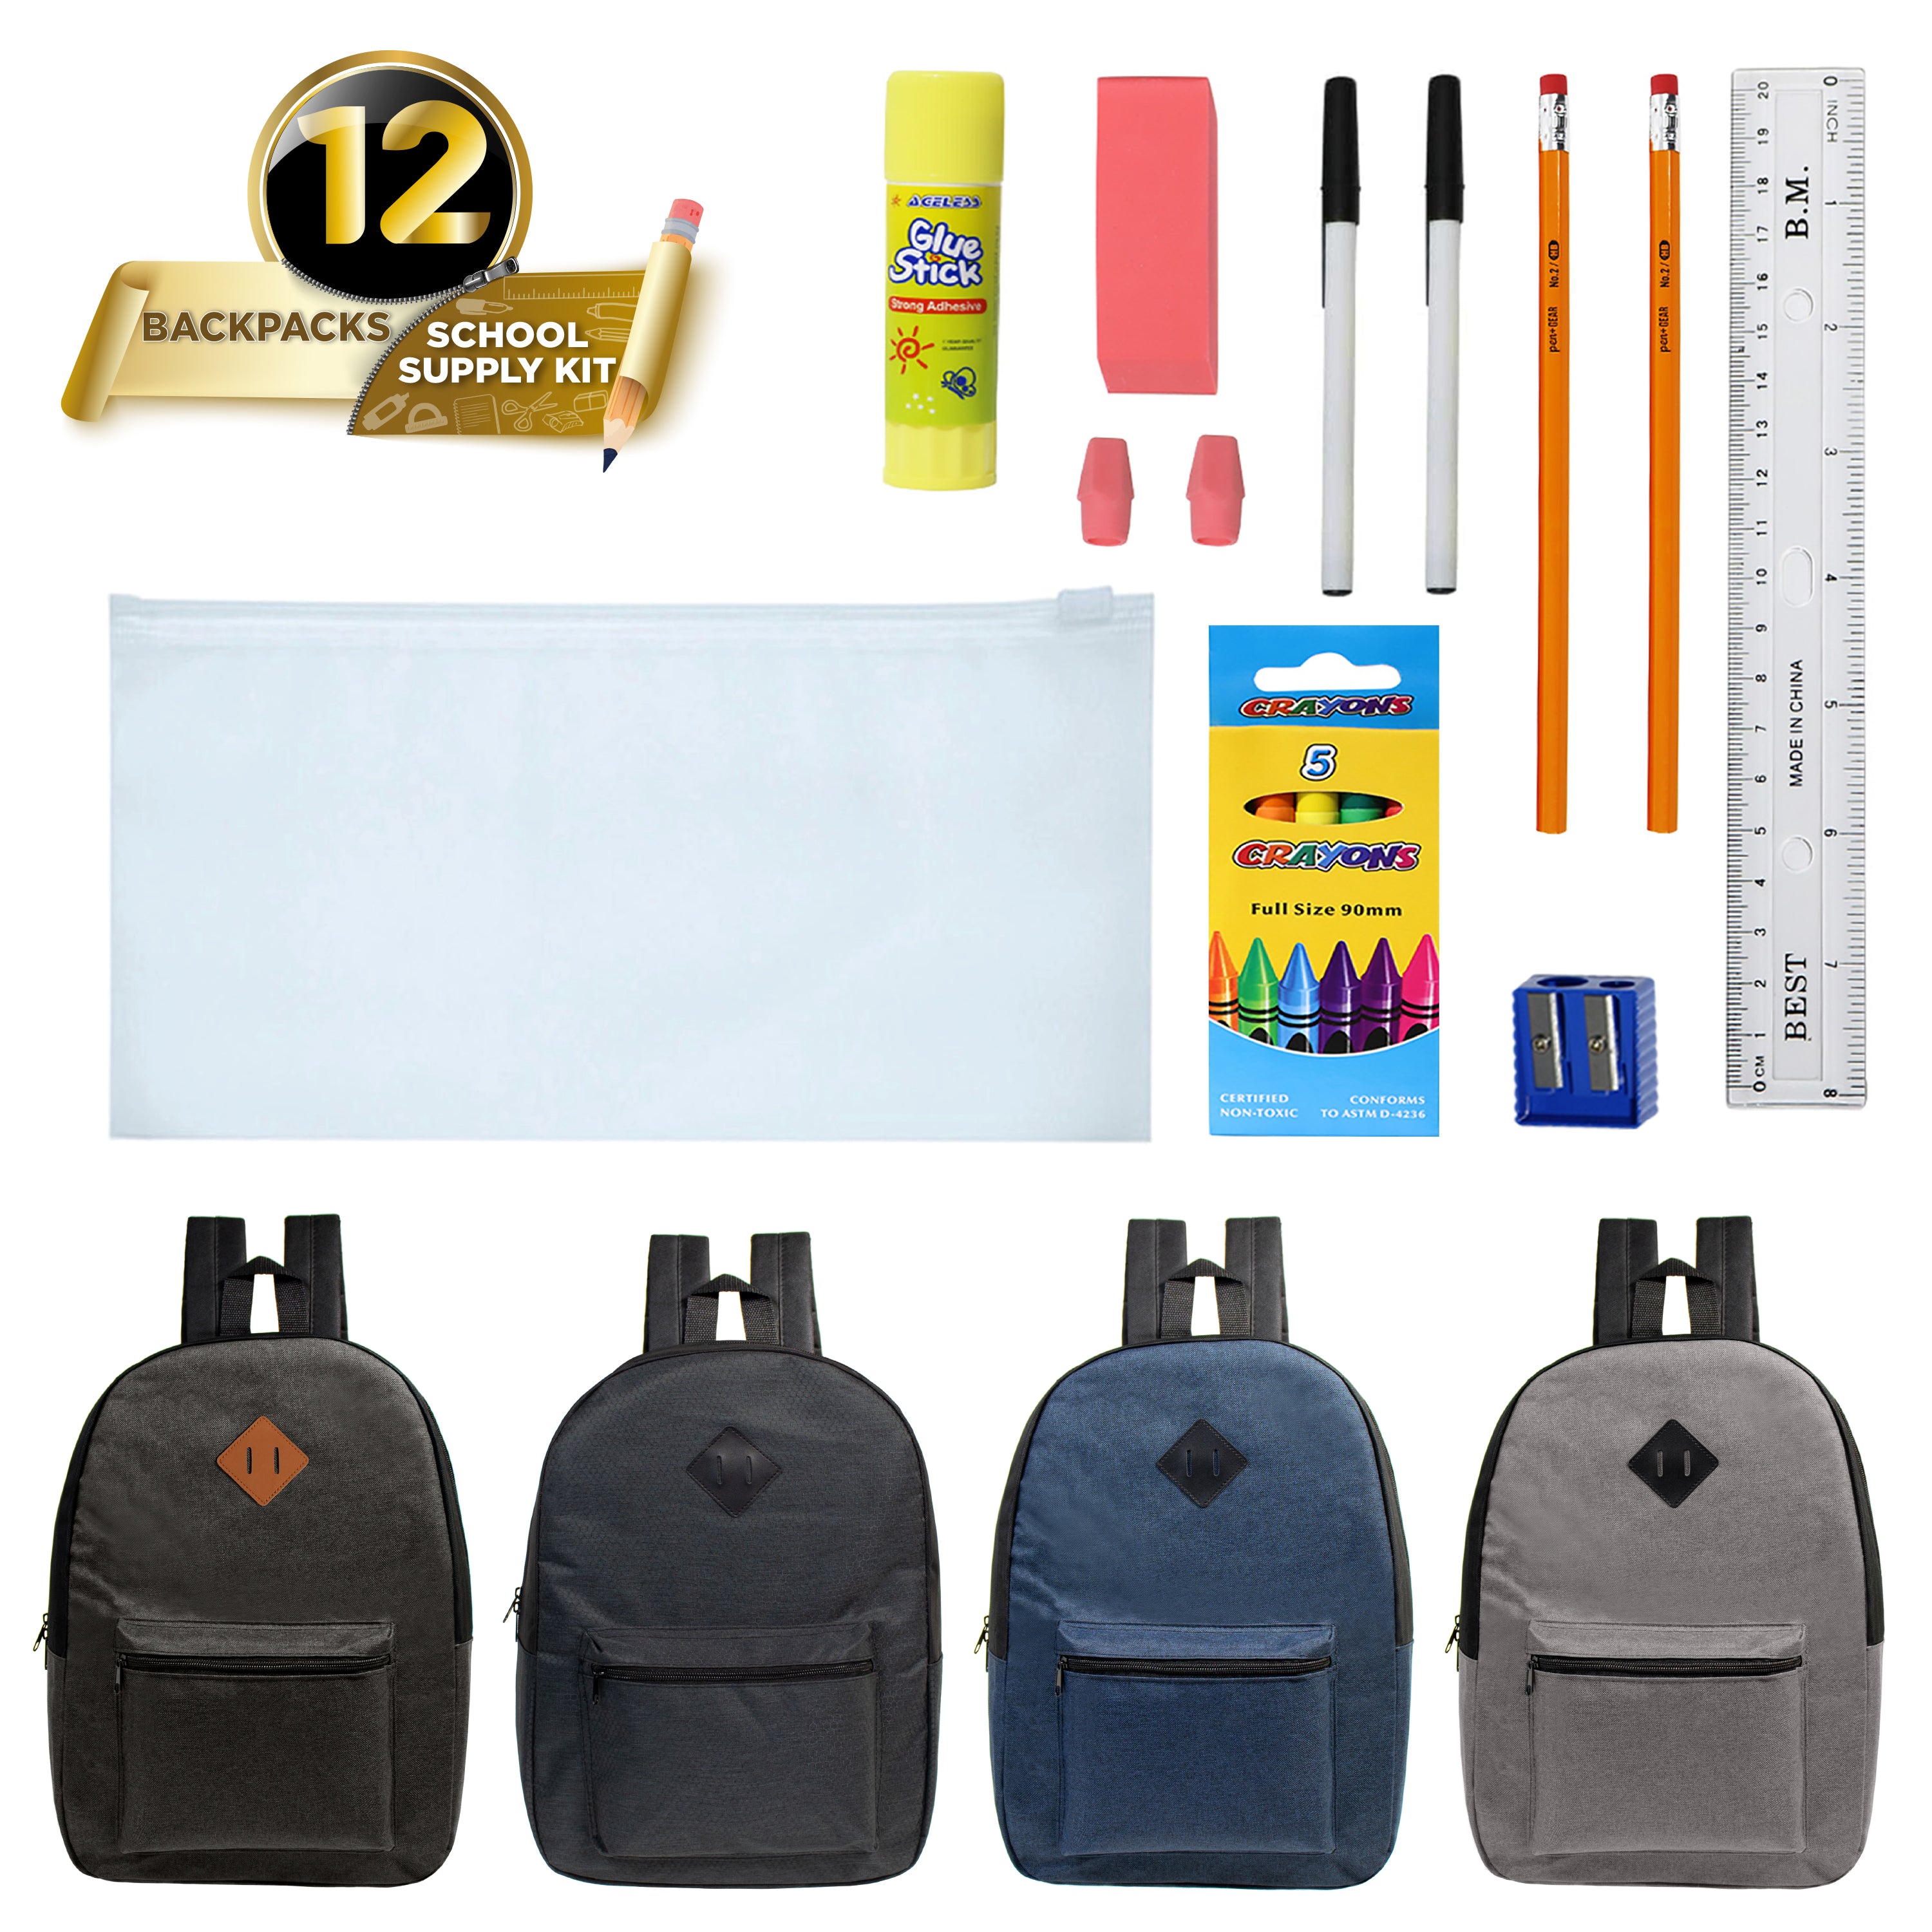 17-inch Bulk Backpack and School Supply Kit Combo Comes in 12 Assorted Colors and School Supply Kit